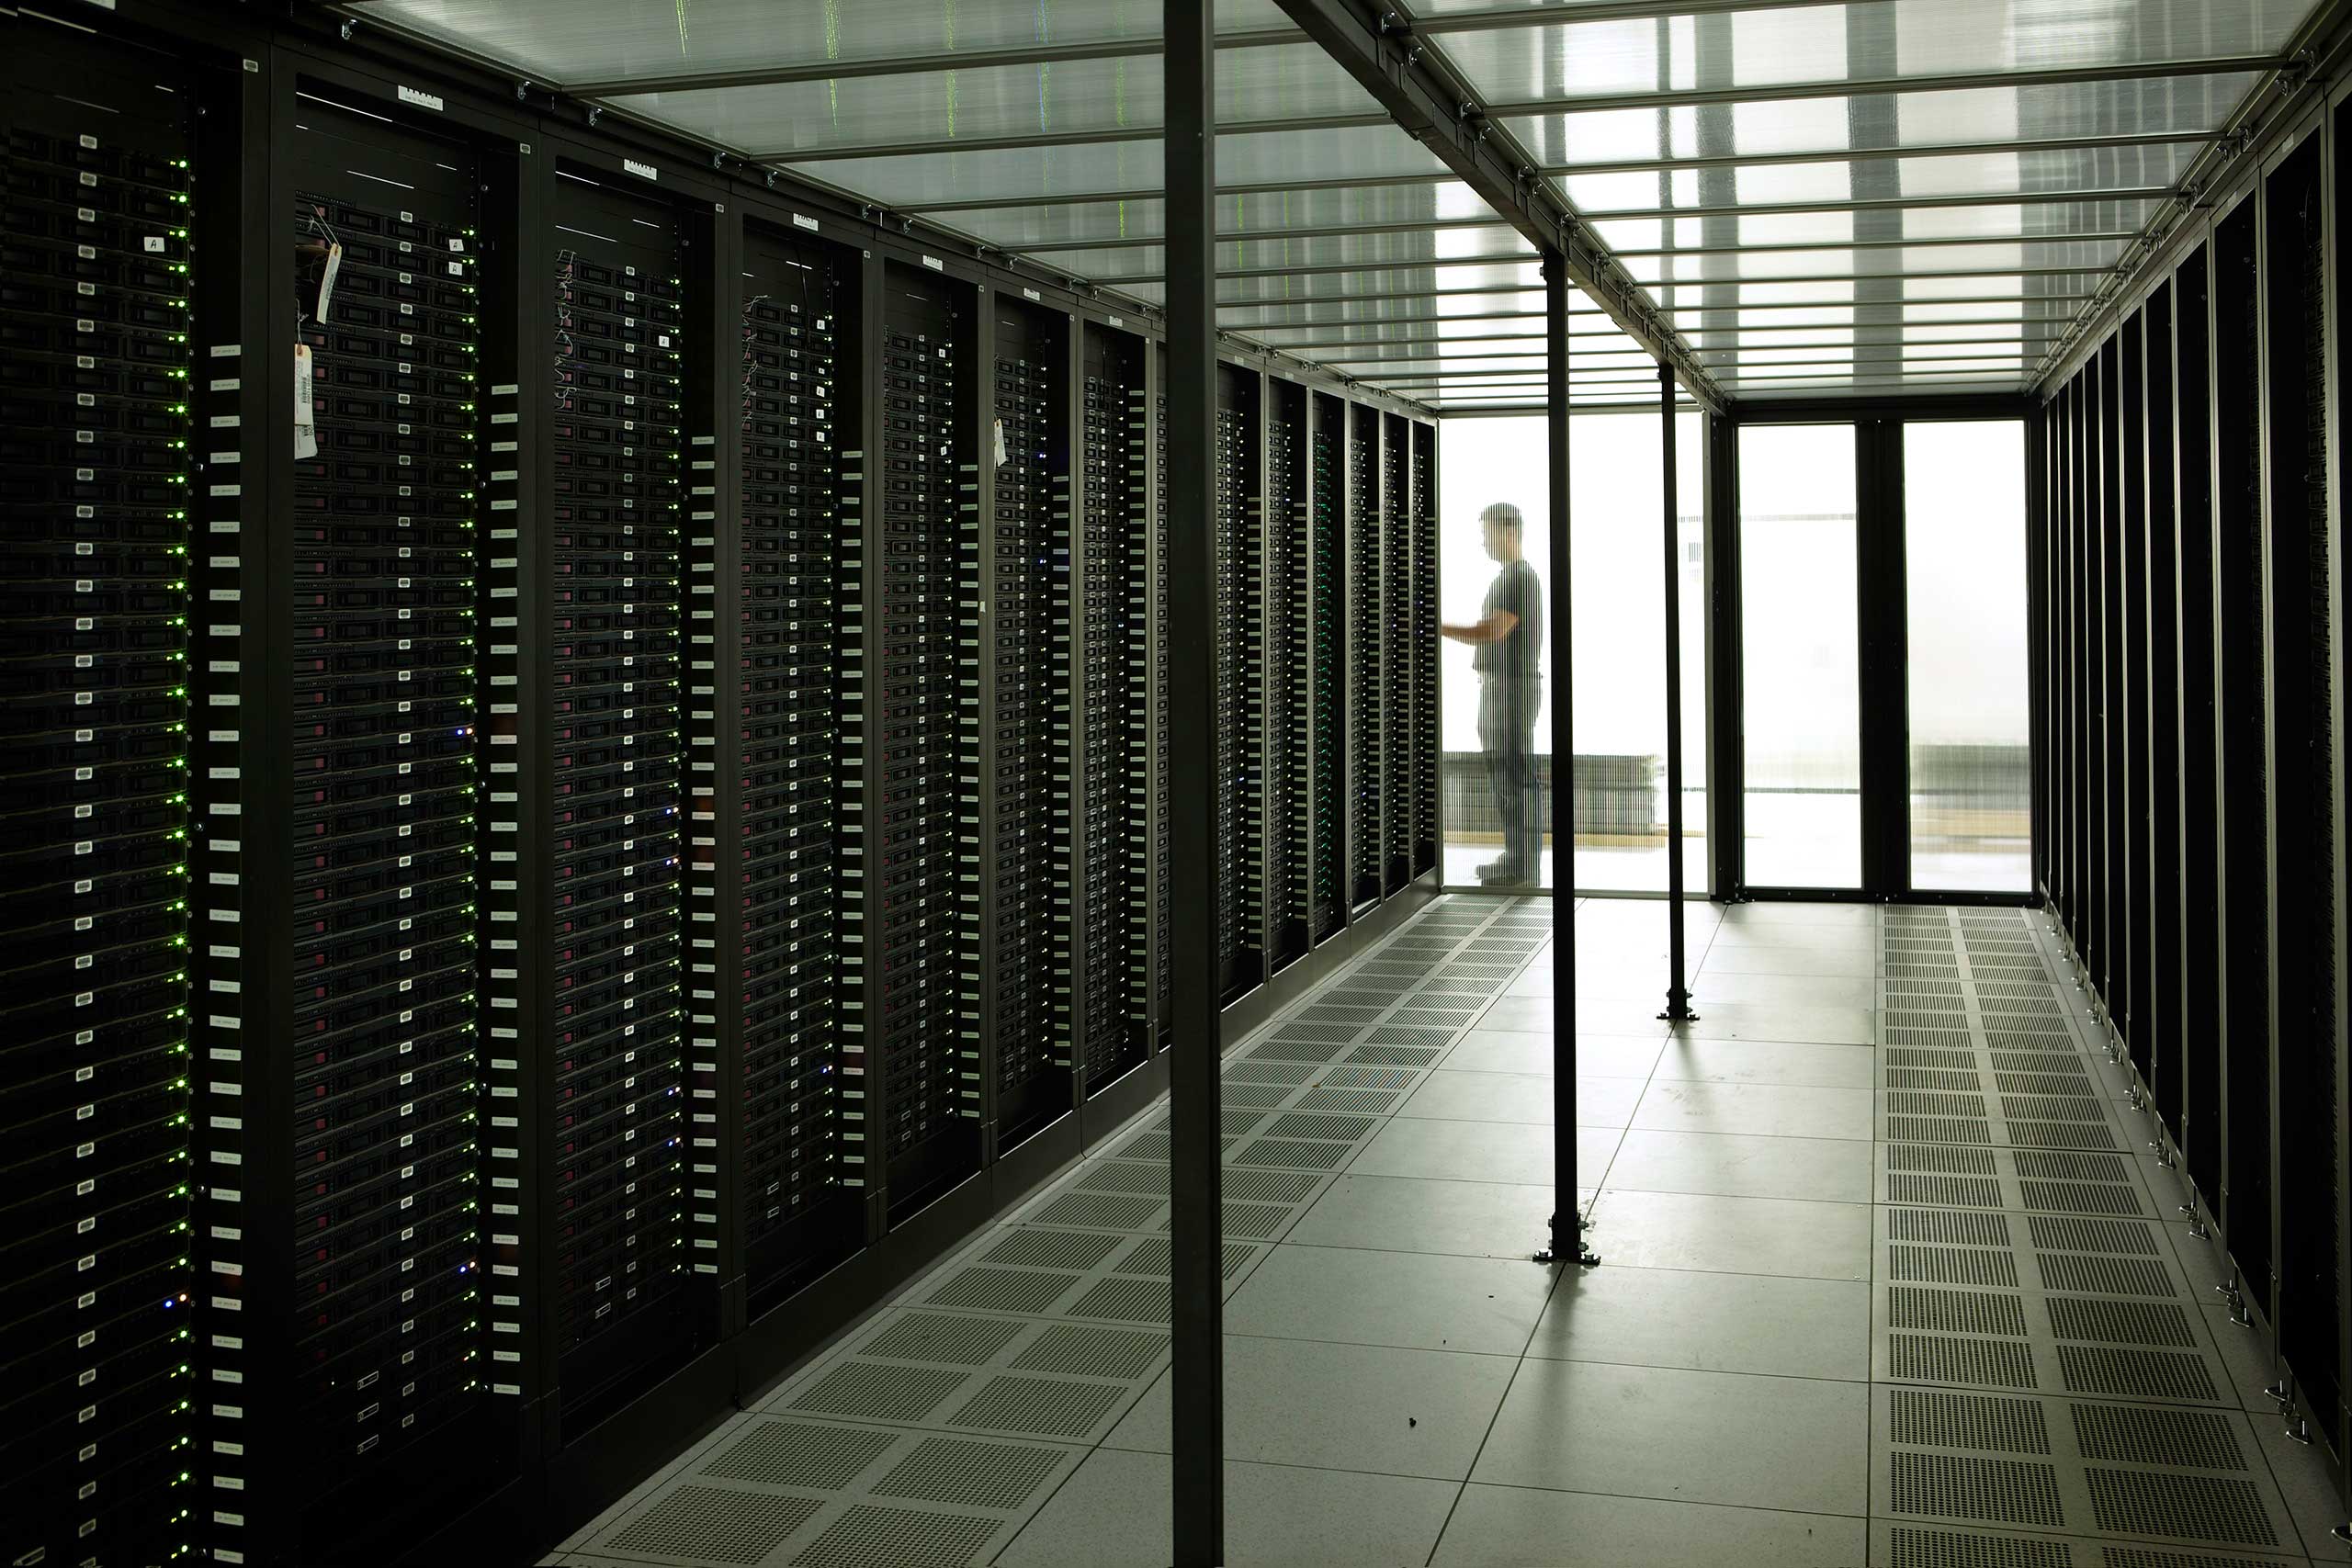 These rows of servers are set up to minimize the energy required to keep the data center running.